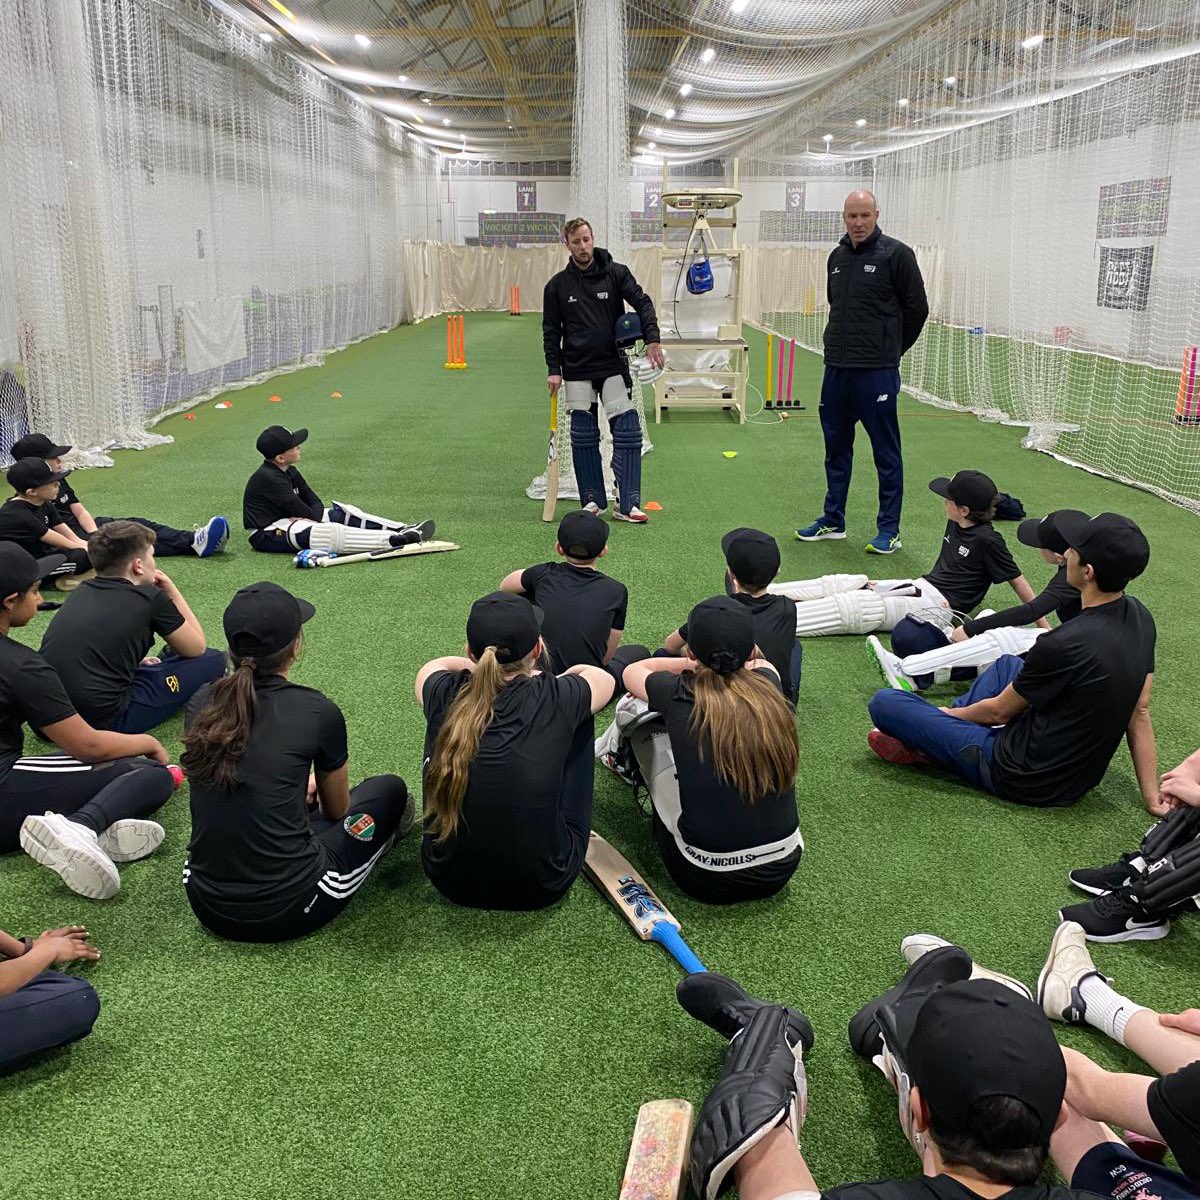 We’ve had a special visitor at our Specialist Spin Bowling Clinic… 🤩 🔥 Billy Root dropped by for a Q&A session with our players! An incredible opportunity to learn from the @GlamCricket ace 👊 🏏 #r66tacademy